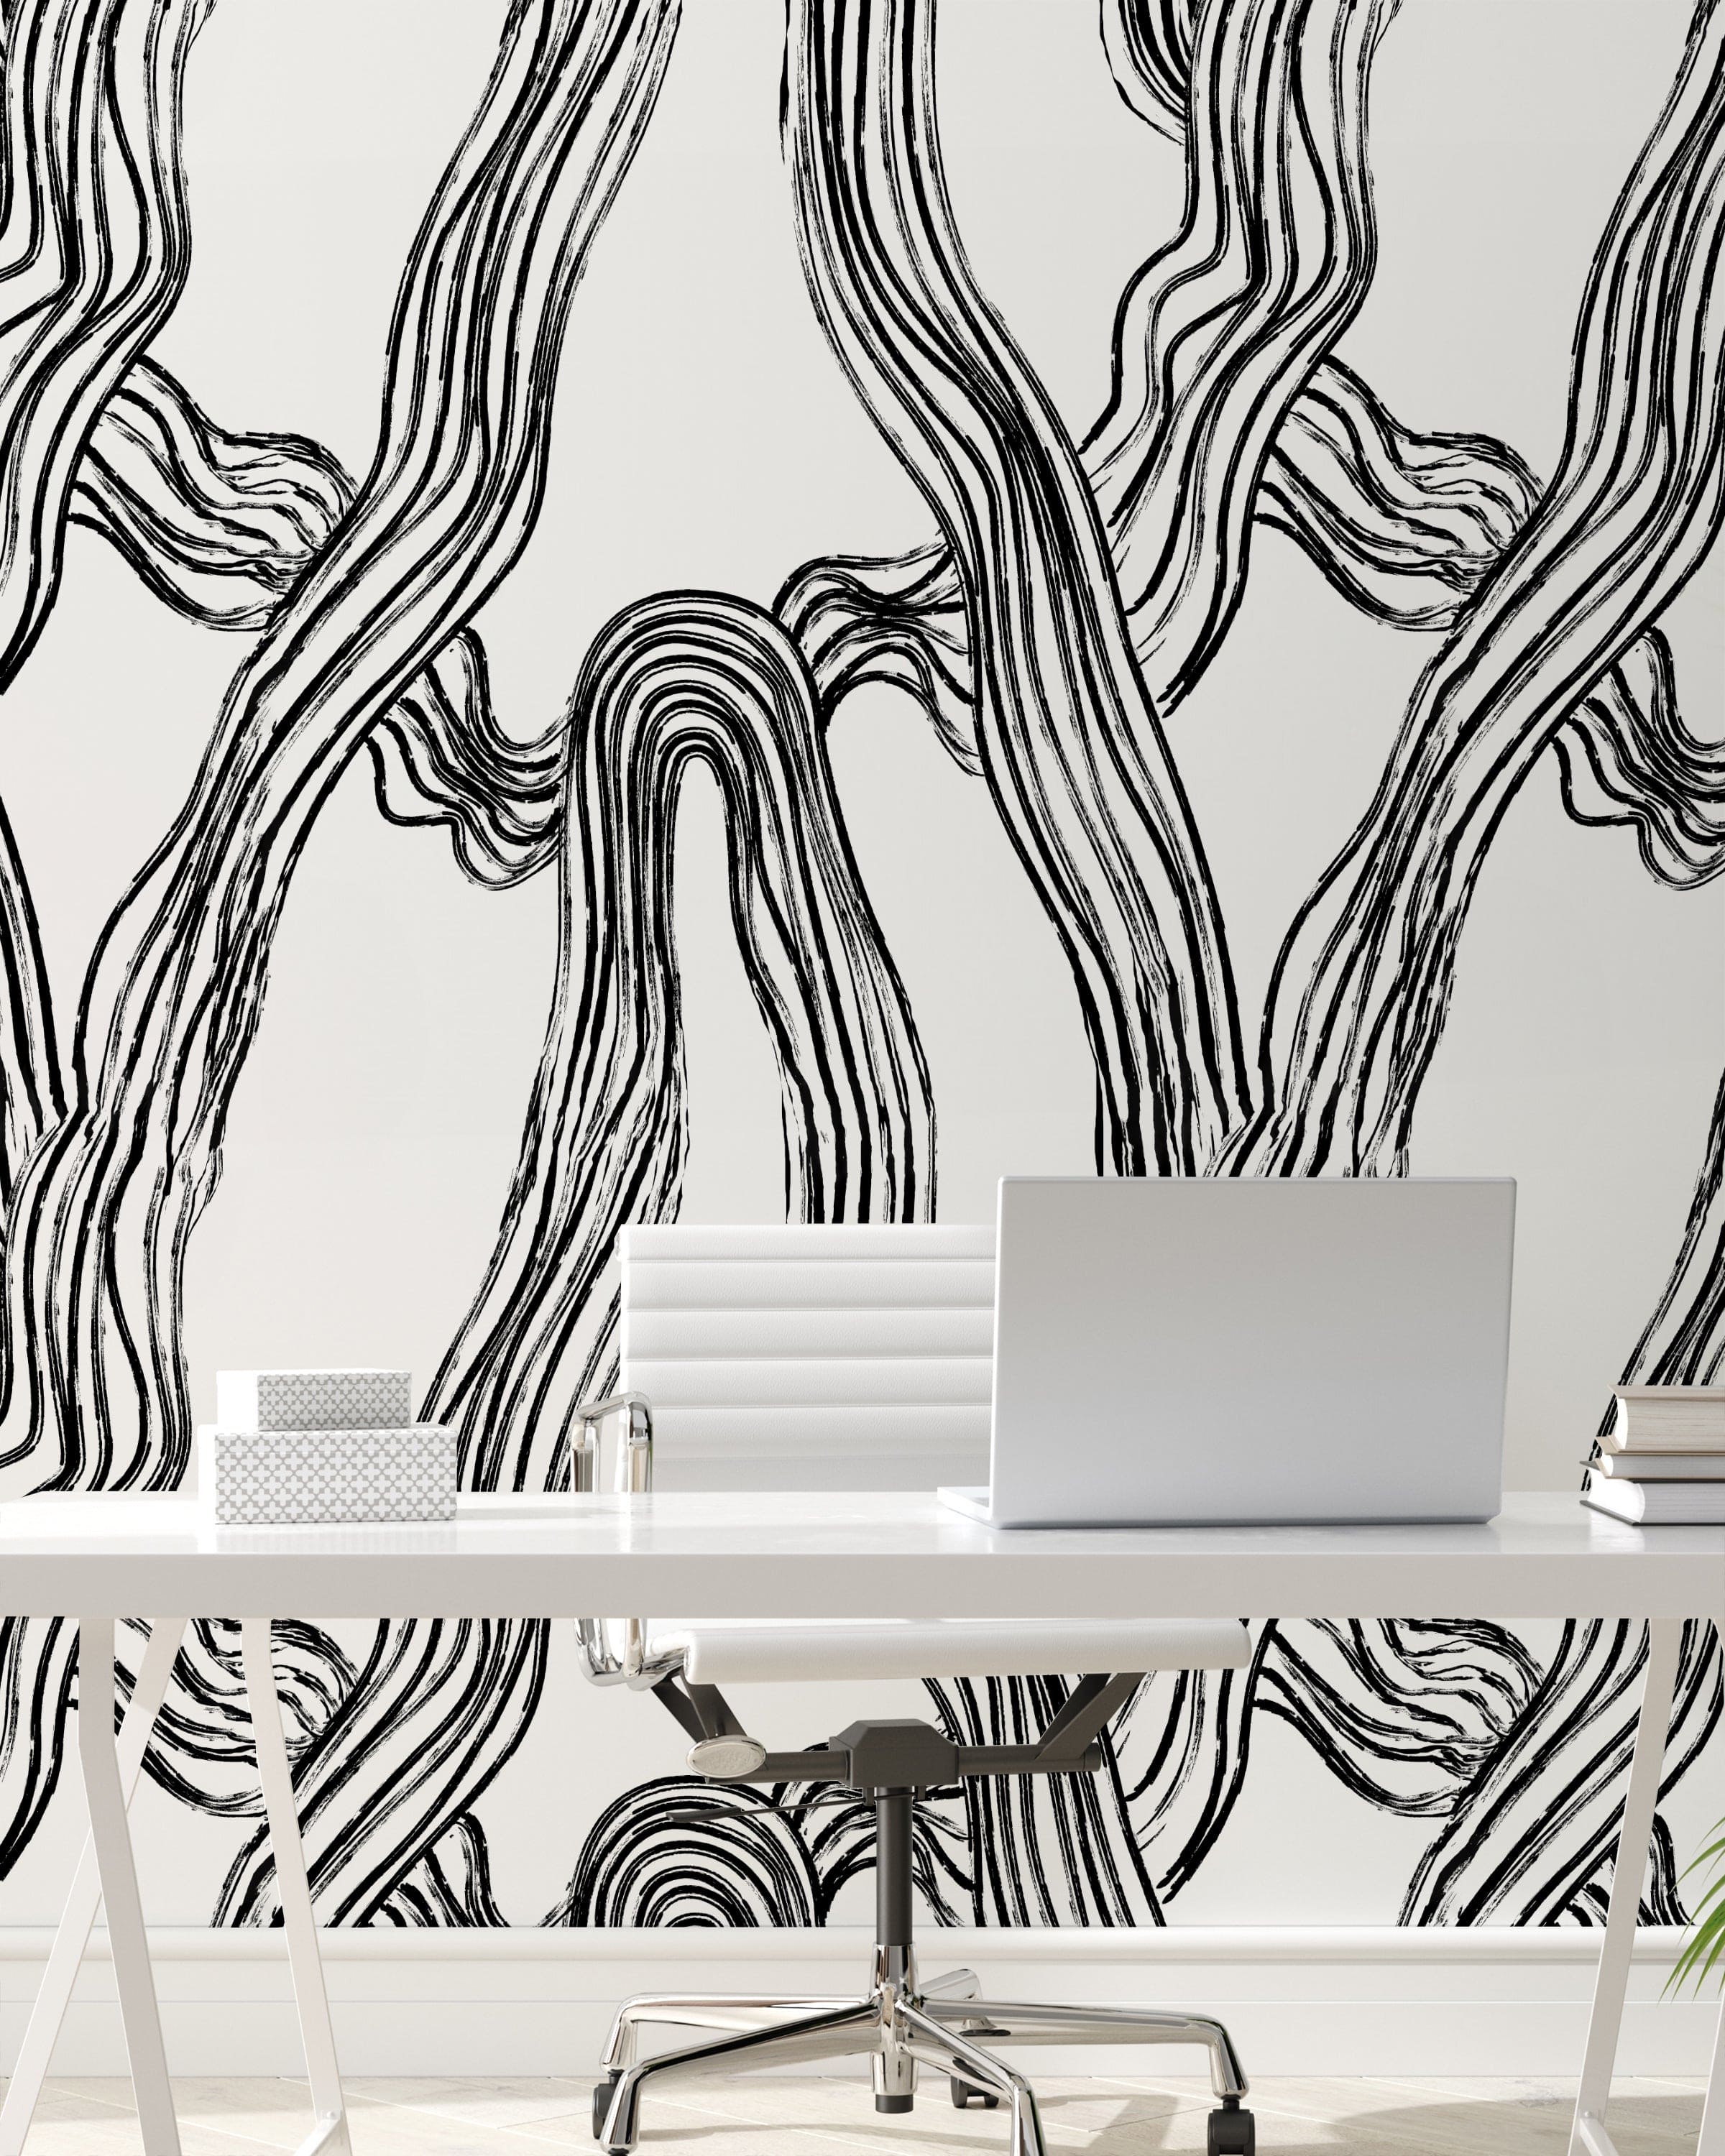 Modern workspace featuring a sleek white desk with a laptop, surrounded by walls covered in an abstract black and white flowing lines wallpaper, giving a dynamic and artistic atmosphere to the room.